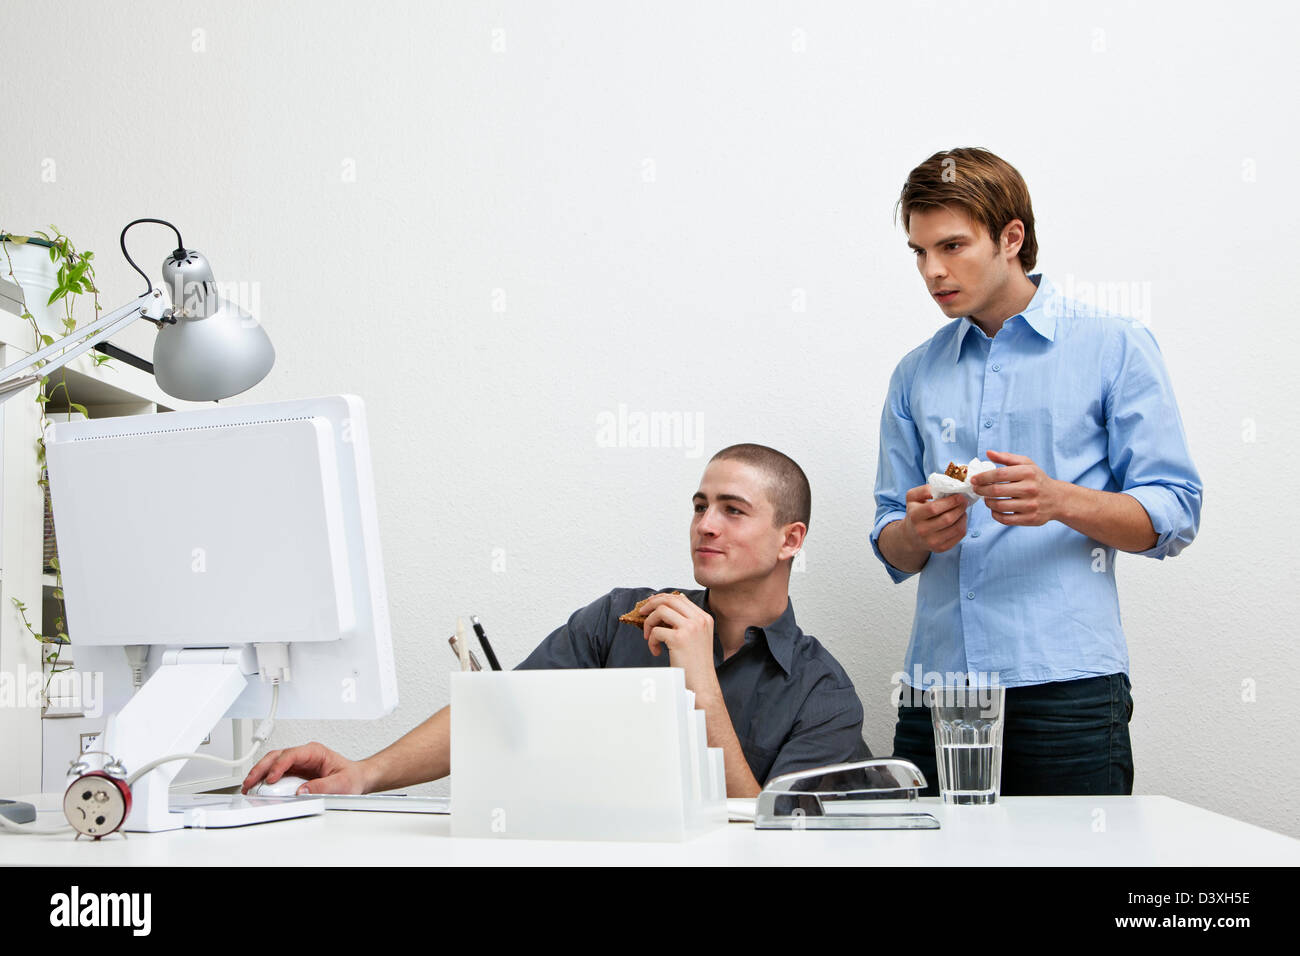 IT professionals working together on computer problems at lunch time Stock Photo